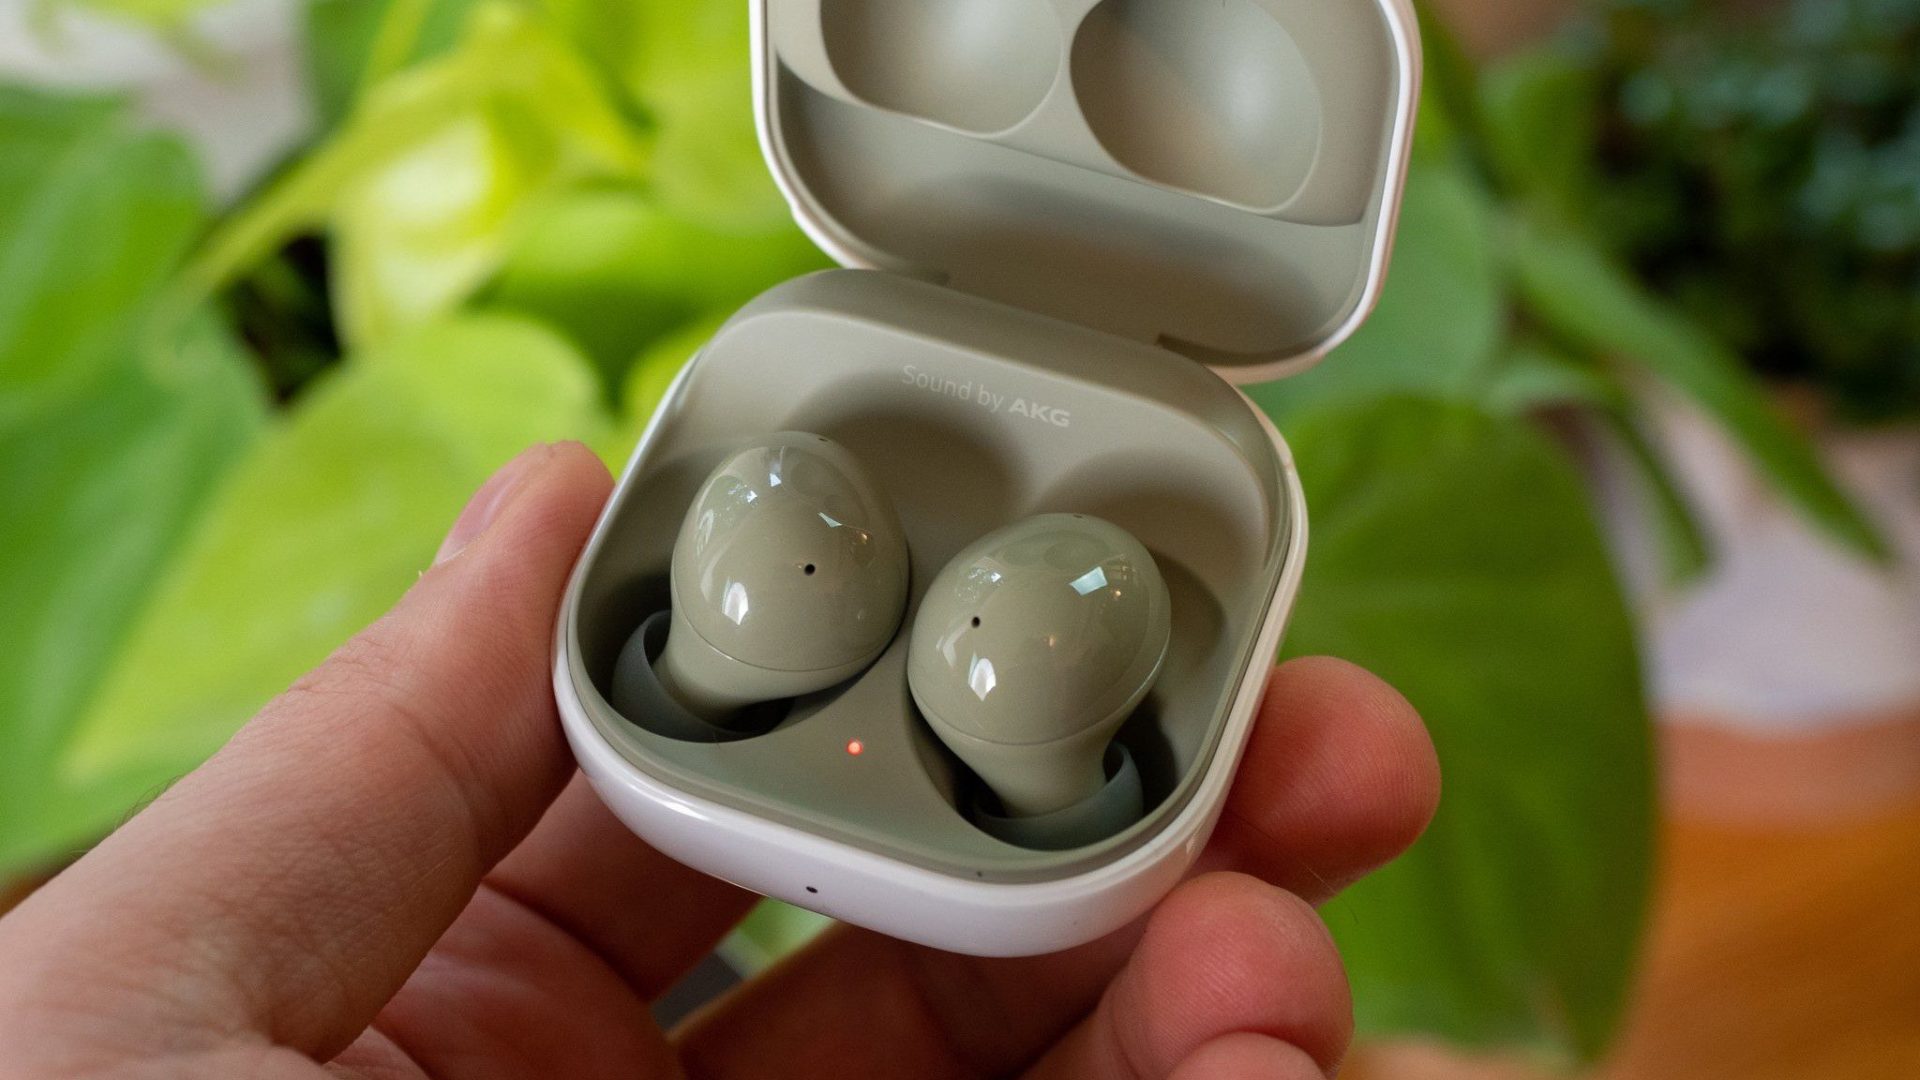 Galaxy Buds audio upgrades spread their wings to more Samsung devices